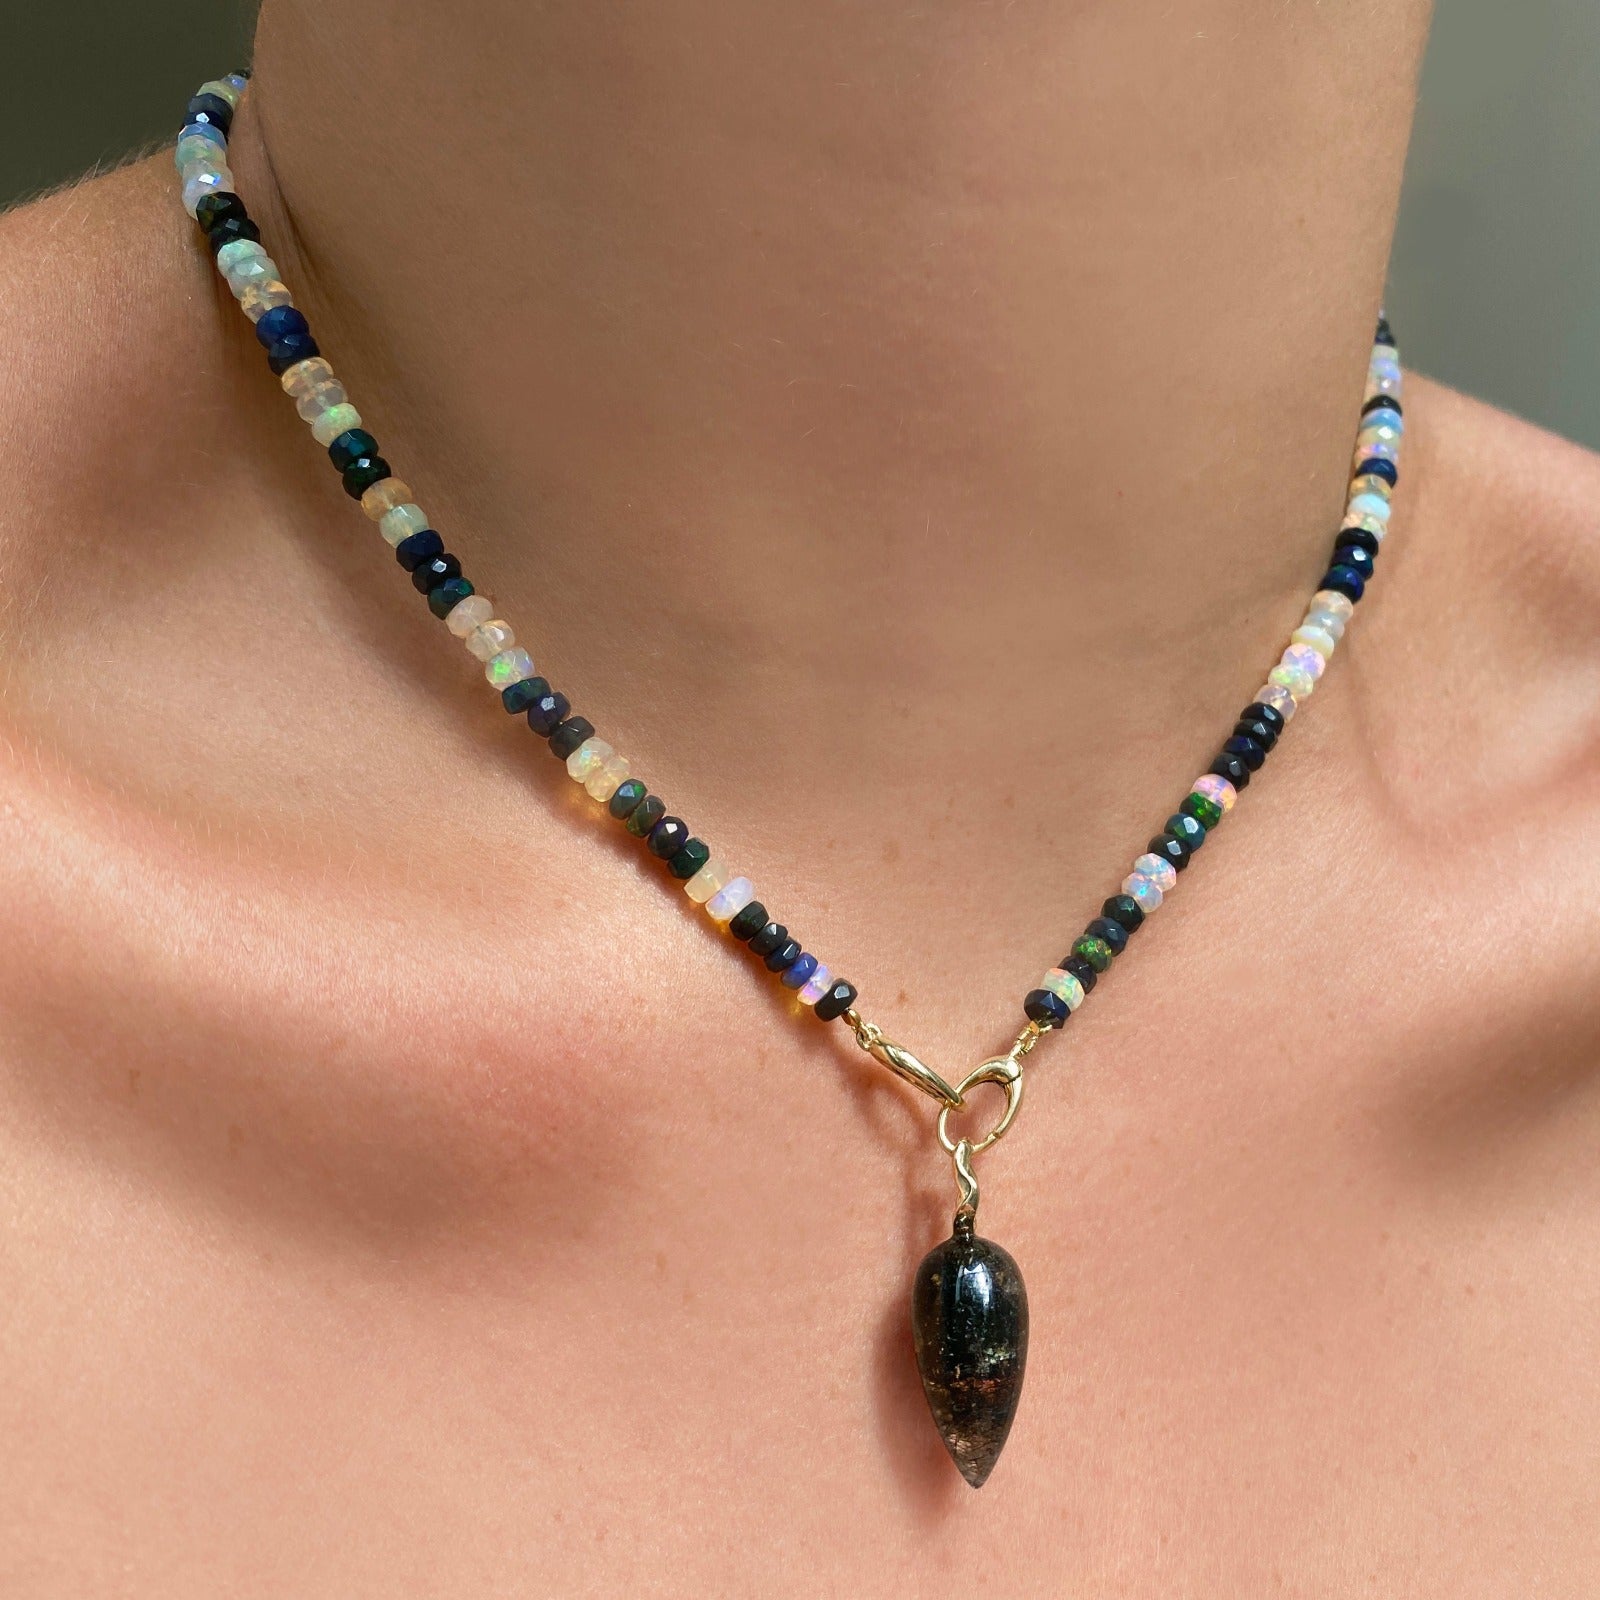 Shimmering beaded necklace made of faceted opals in shades of fiery pastels, grey, teal, and black on a gold linking ovals clasp. Styled on a neck layered with an acorn drop charm.